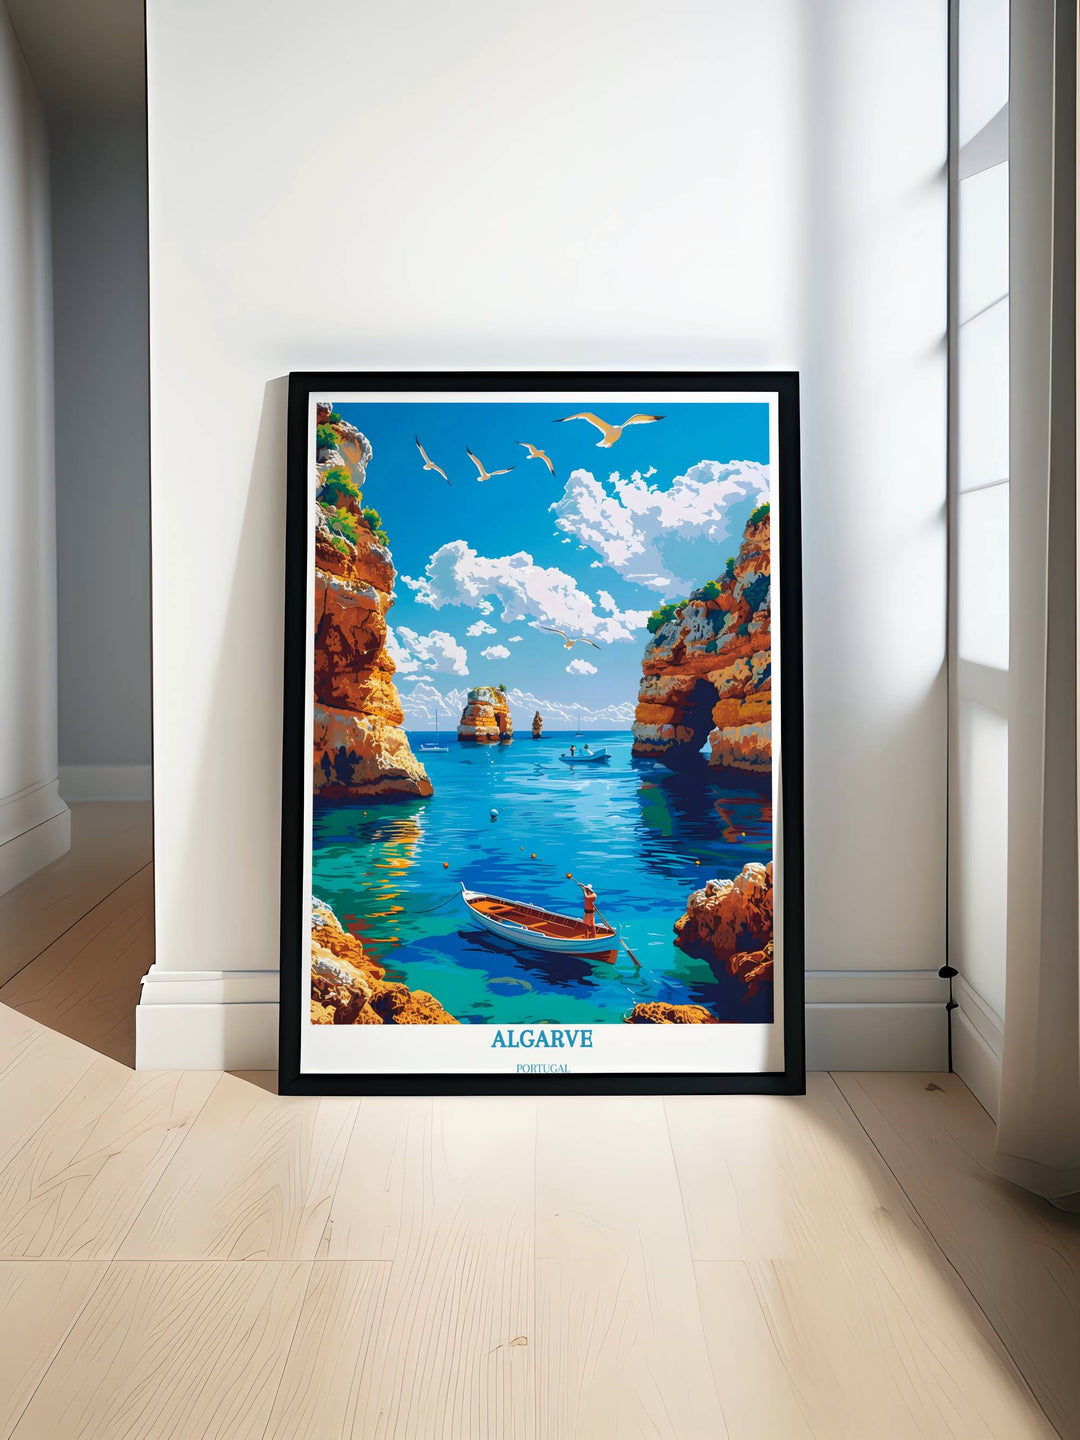 Algarve Travel Poster showcasing the stunning Ponta da Piedade cliffs with vibrant blue waters, perfect for bringing a piece of Portugal into your home